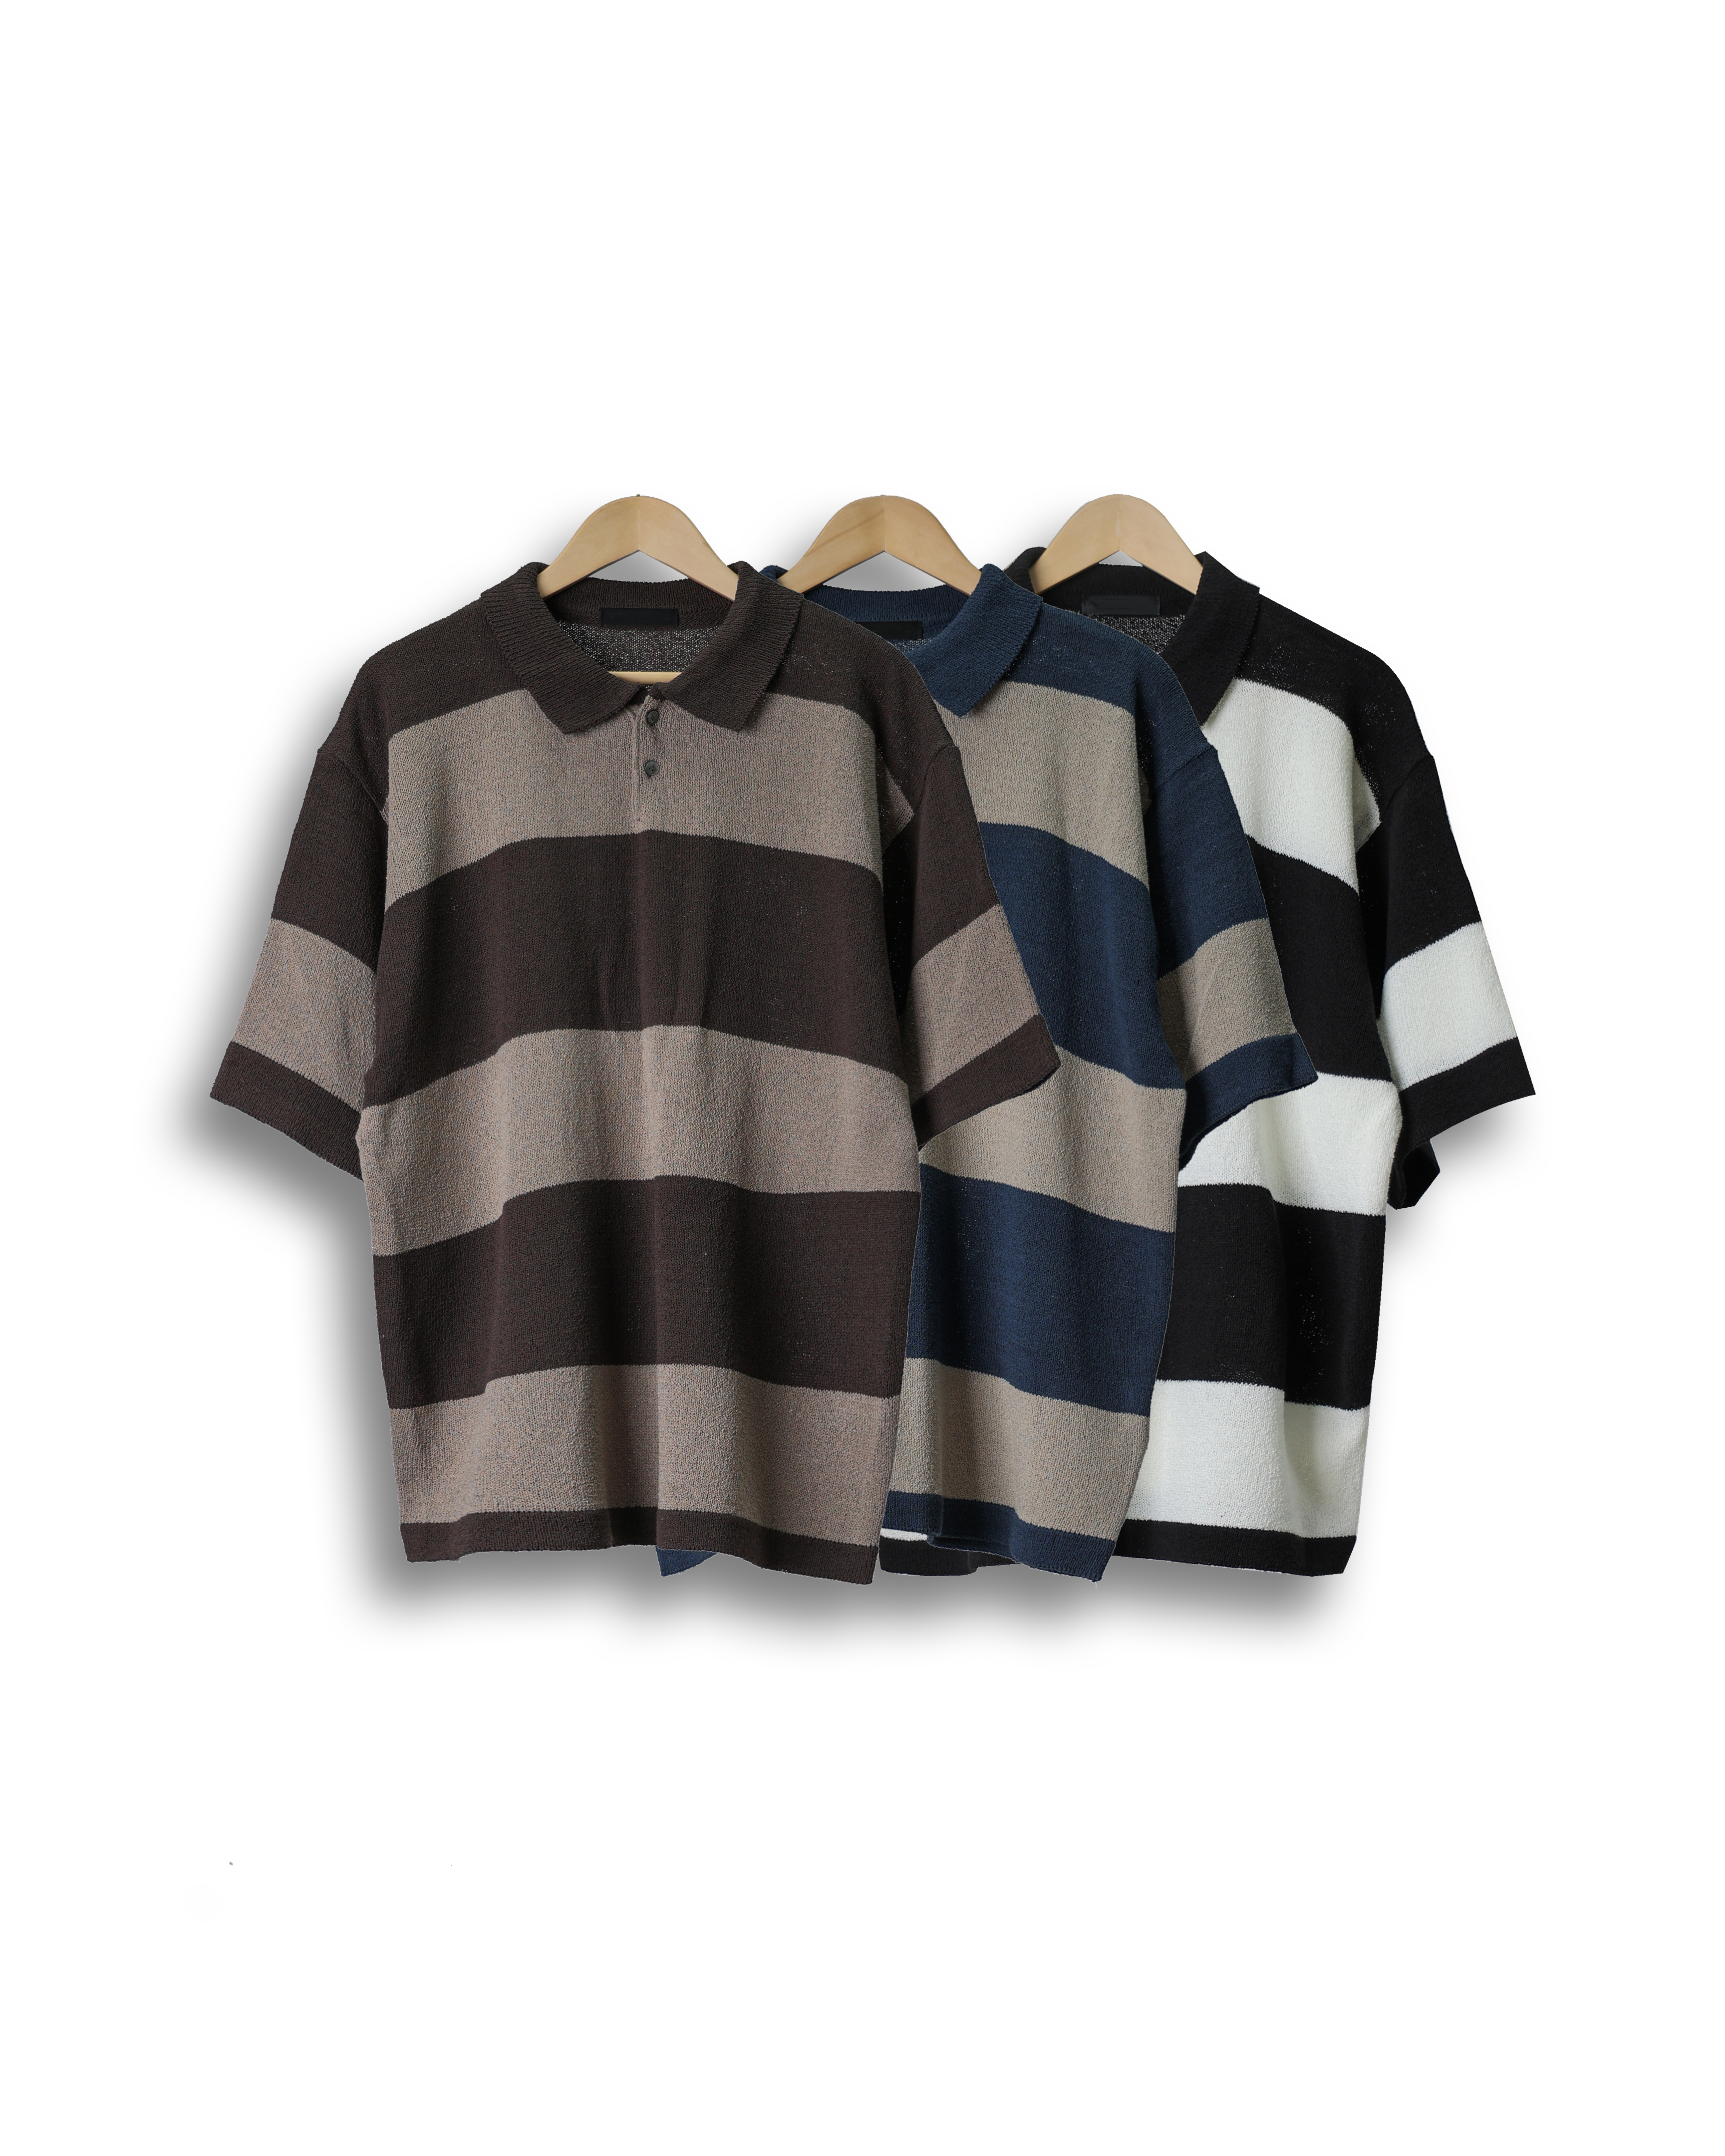 OTHERS Knitted Bold Stripe Half Collar (Black/Brown/Blue)